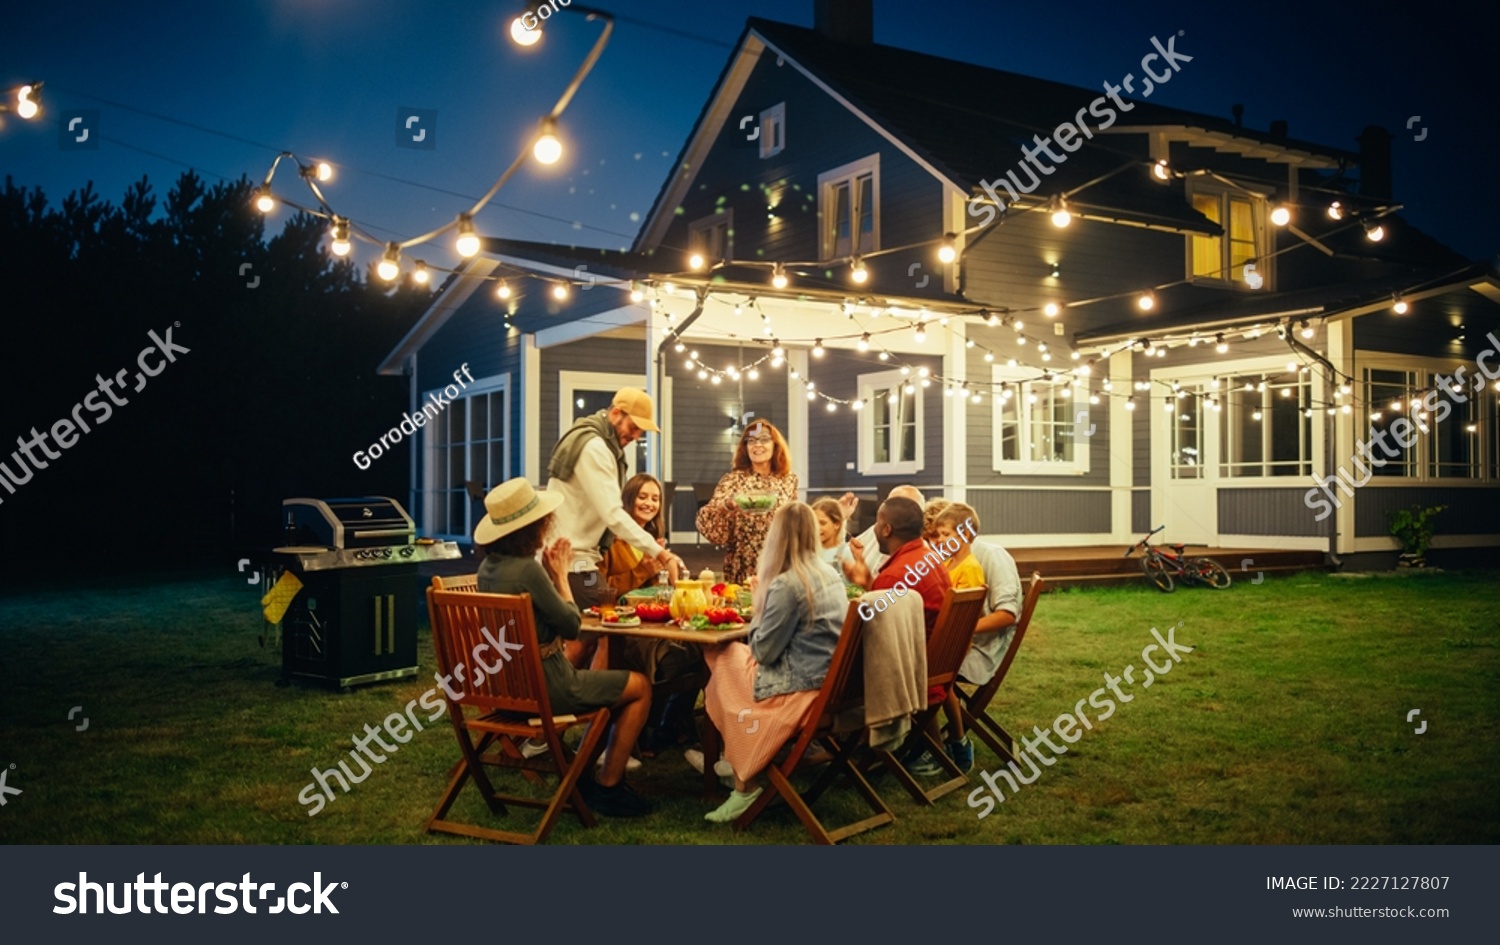 Group of Multiethnic Diverse People Having Fun, Sharing Stories with Each Other and Eating at Outdoors Dinner Party. Family and Friends Gathered Outside Their Home on a Warm Summer Evening. #2227127807